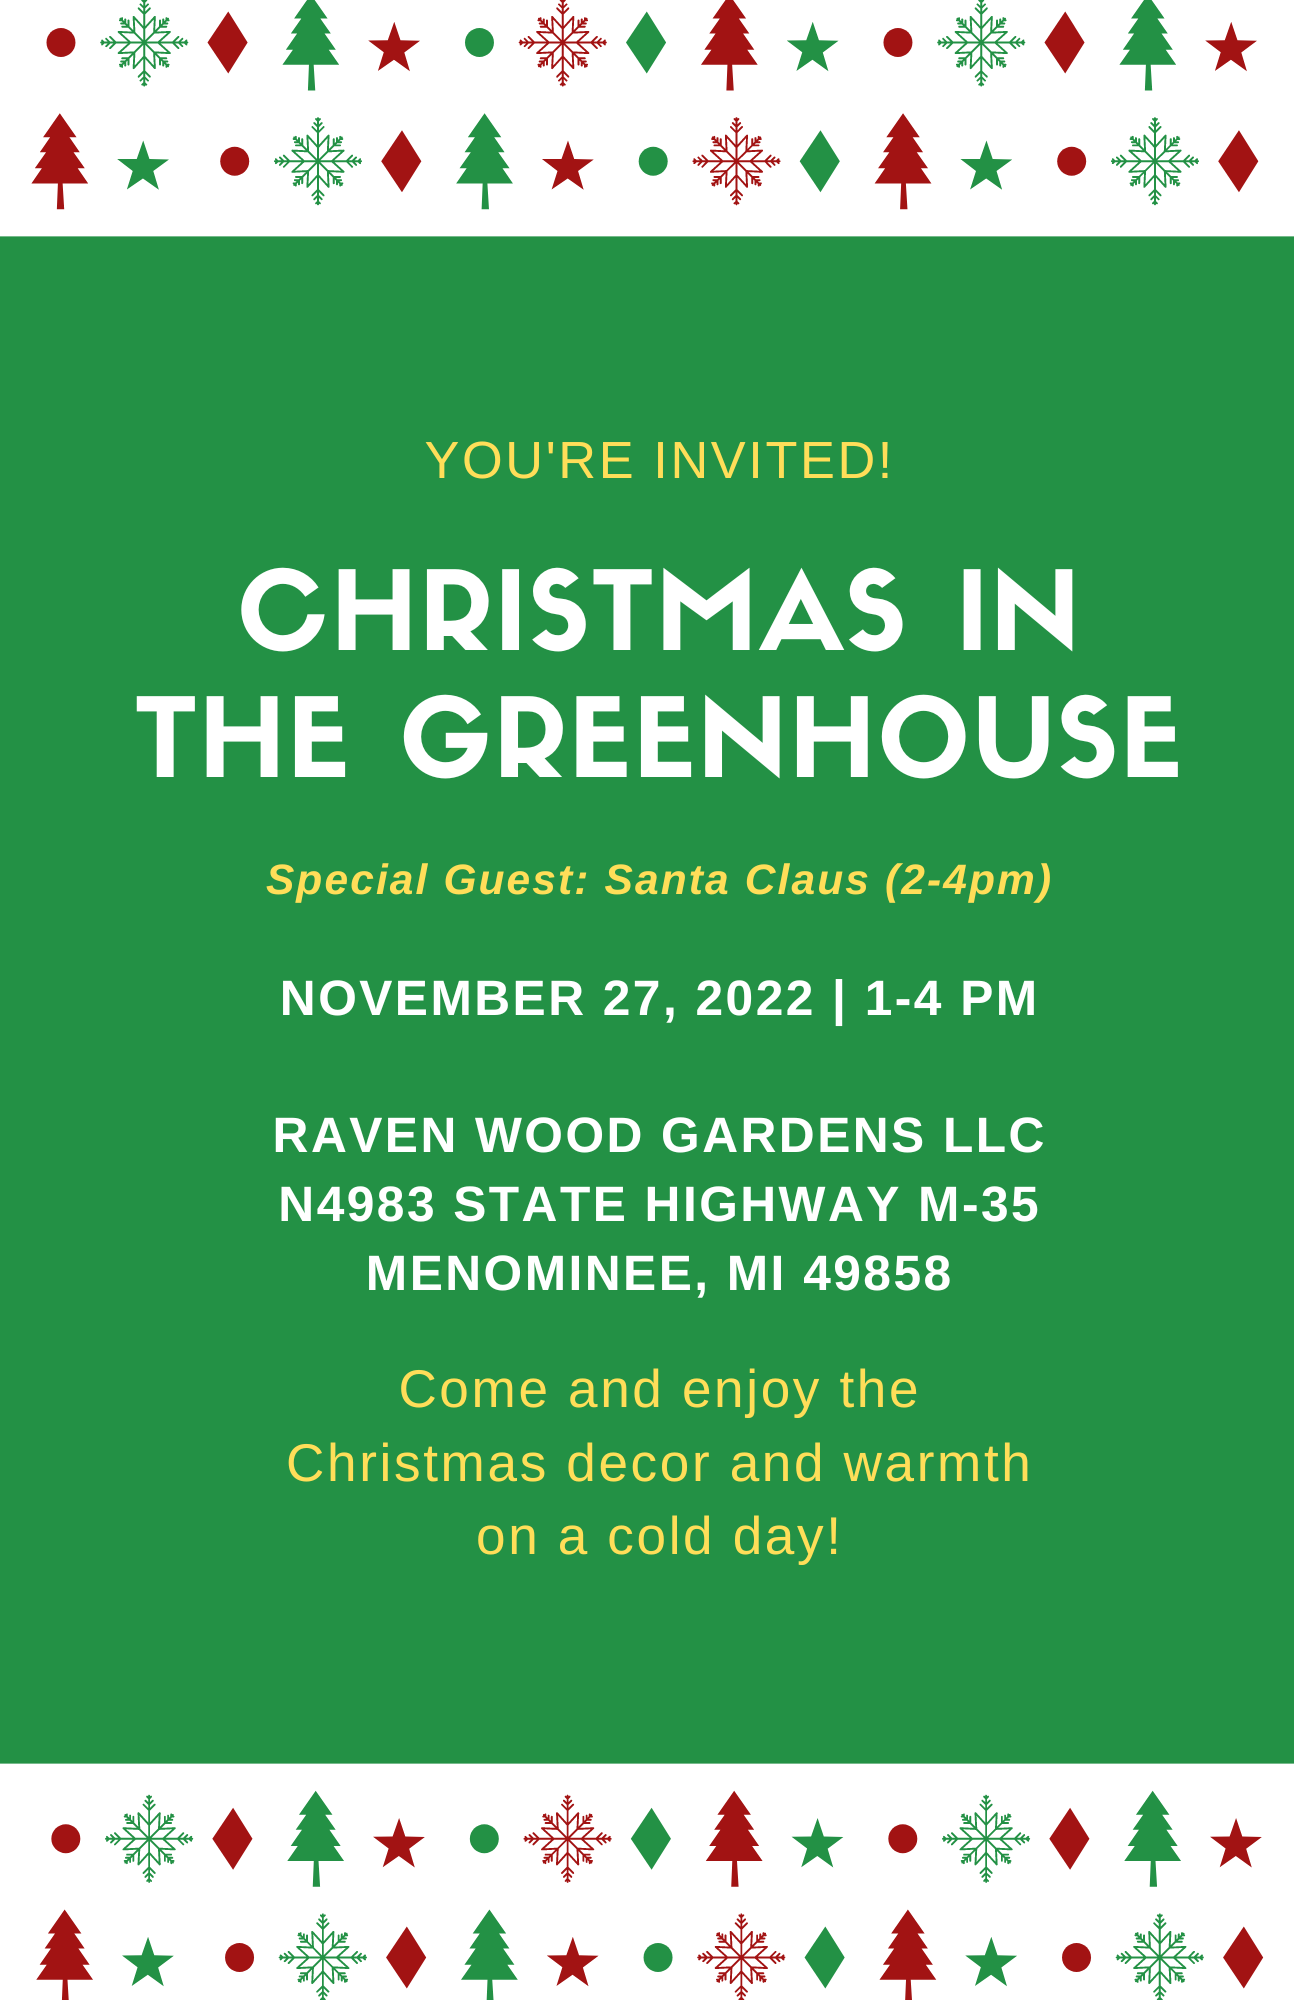 2nd Annual Christmas in the Greenhouse Nov 27 2022